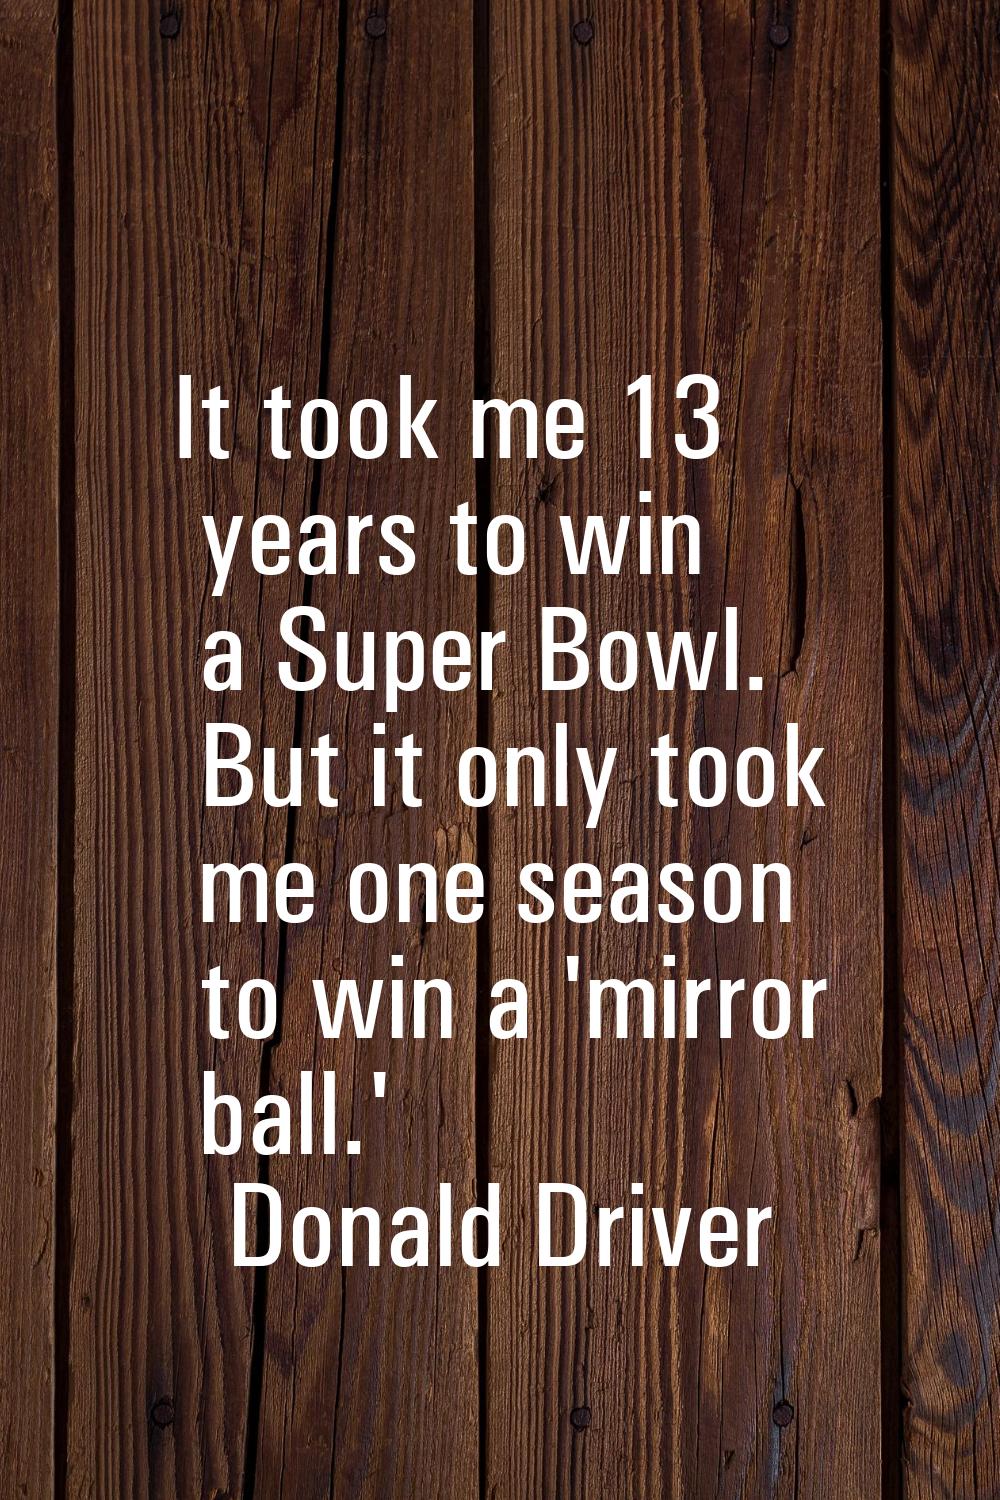 It took me 13 years to win a Super Bowl. But it only took me one season to win a 'mirror ball.'